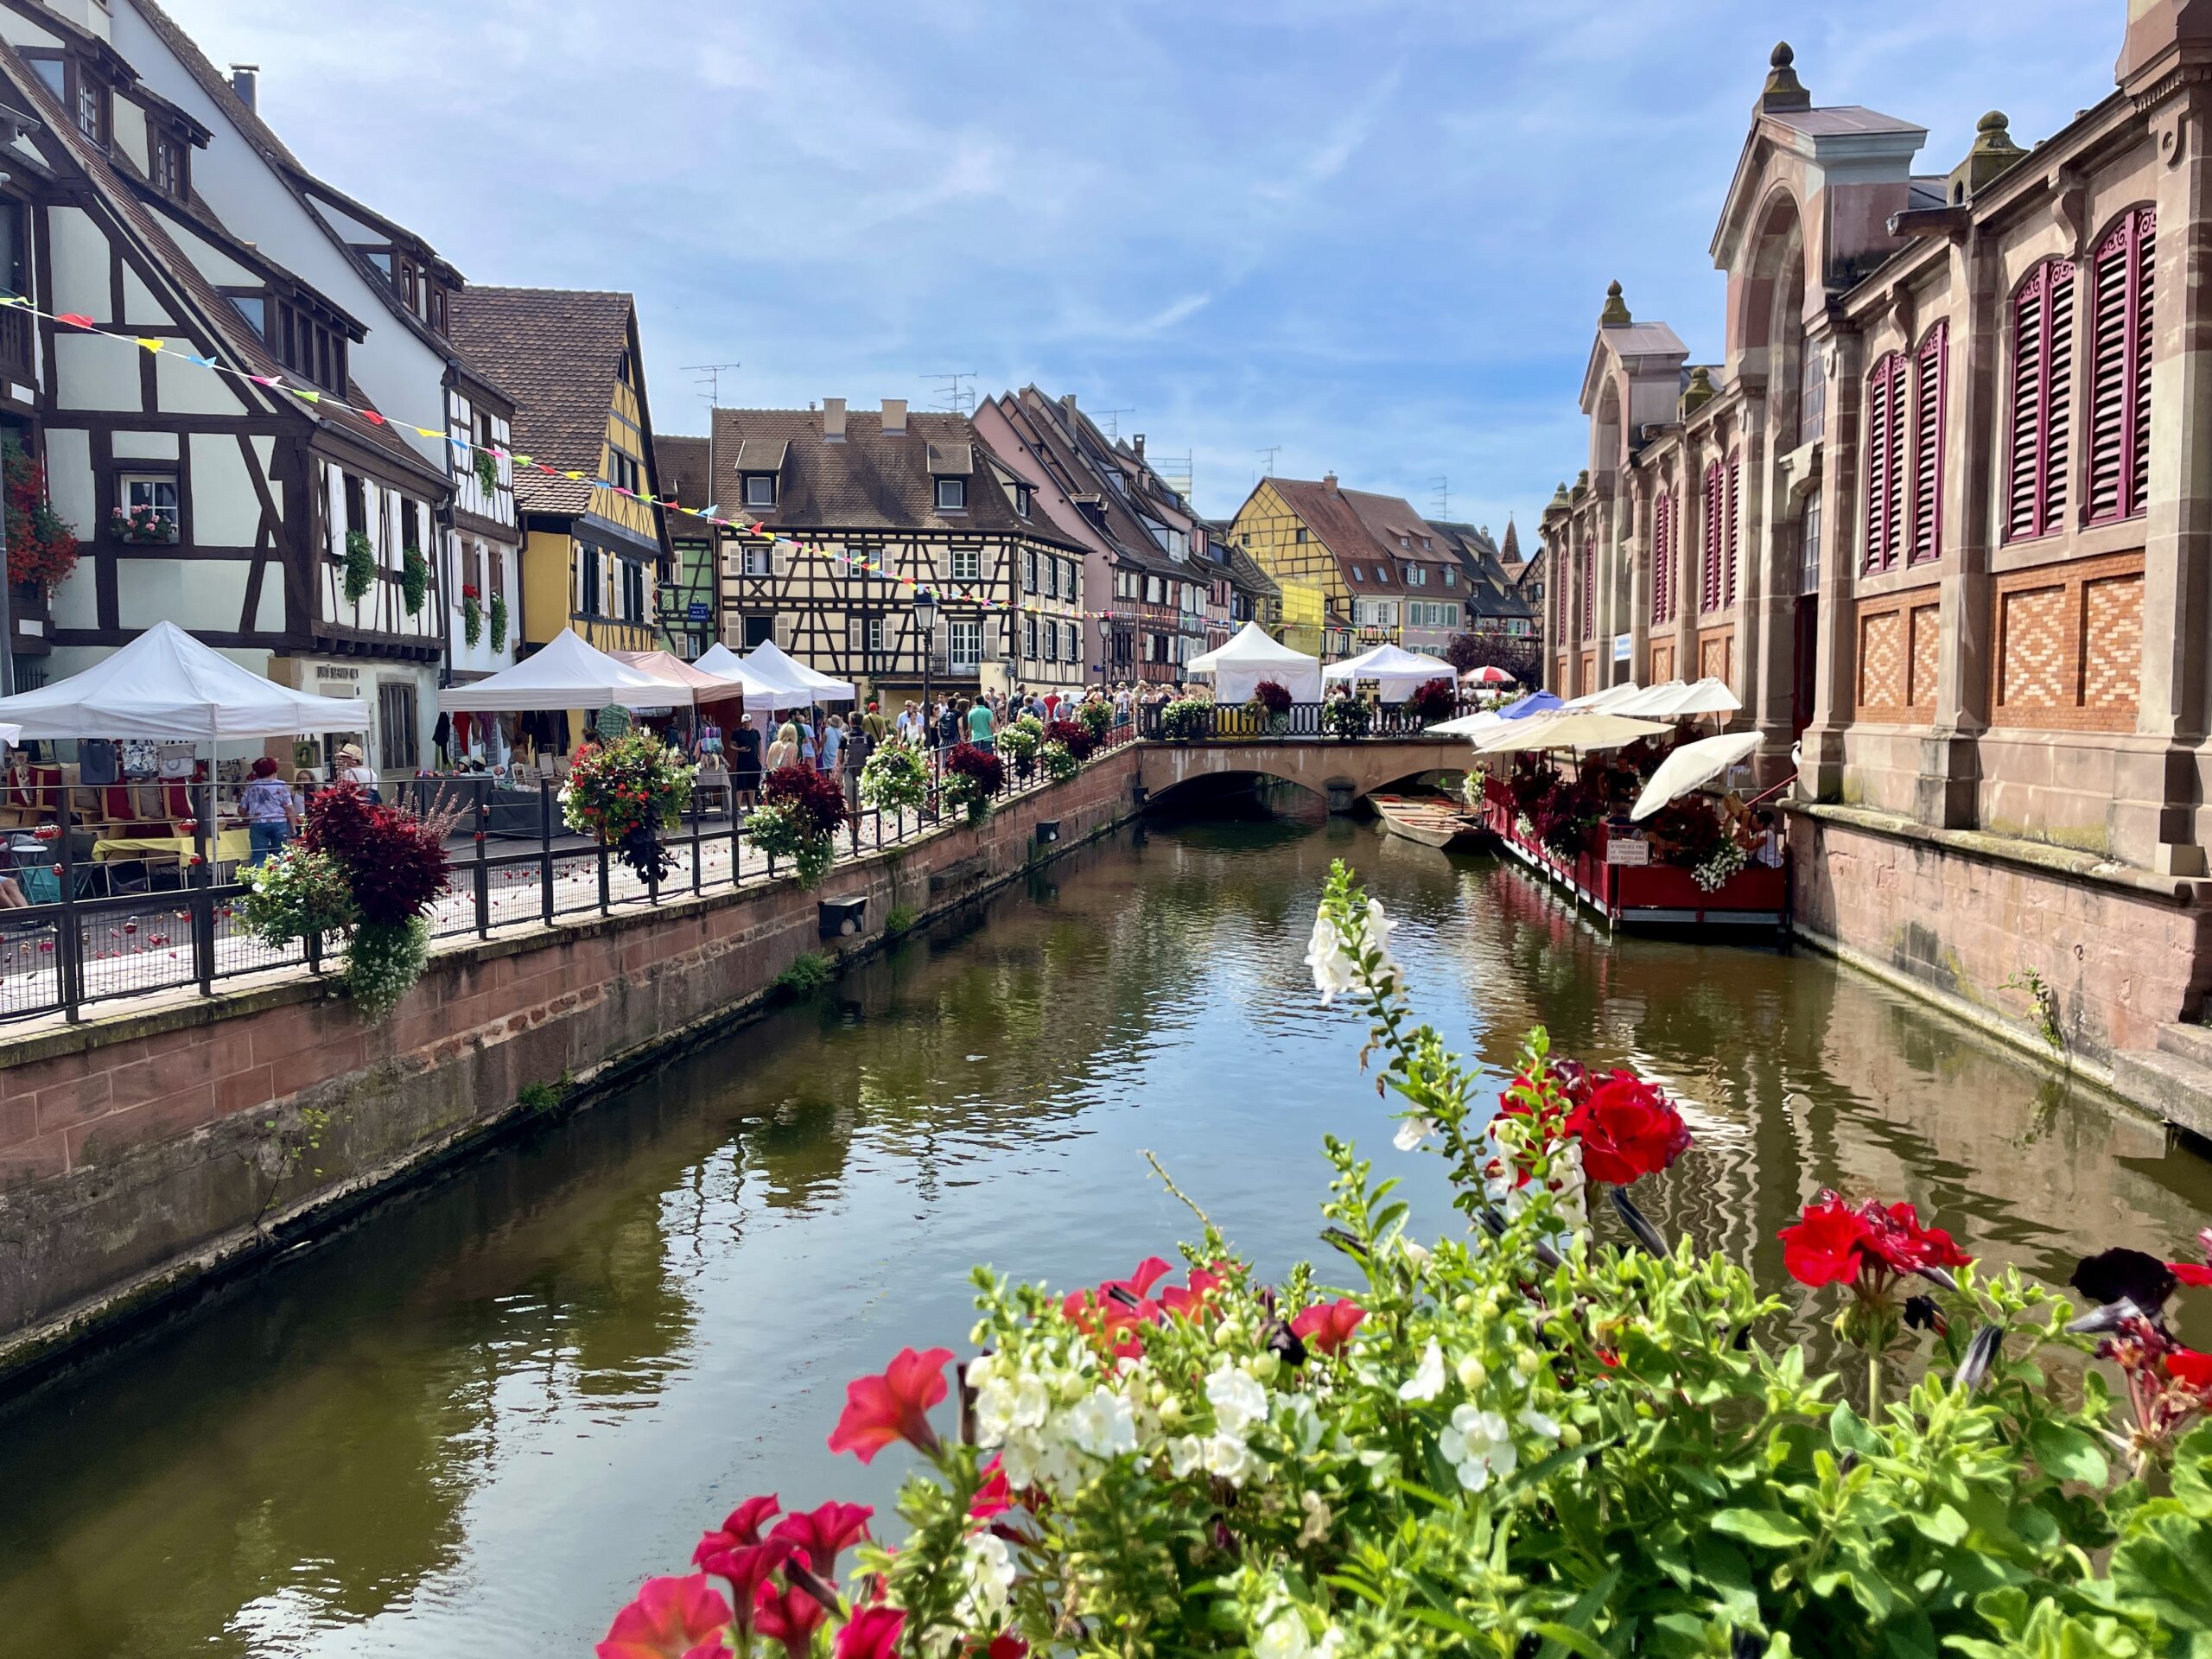 Alsace: A Beautiful Region of Wine, Cheese, and Fairytale Castles